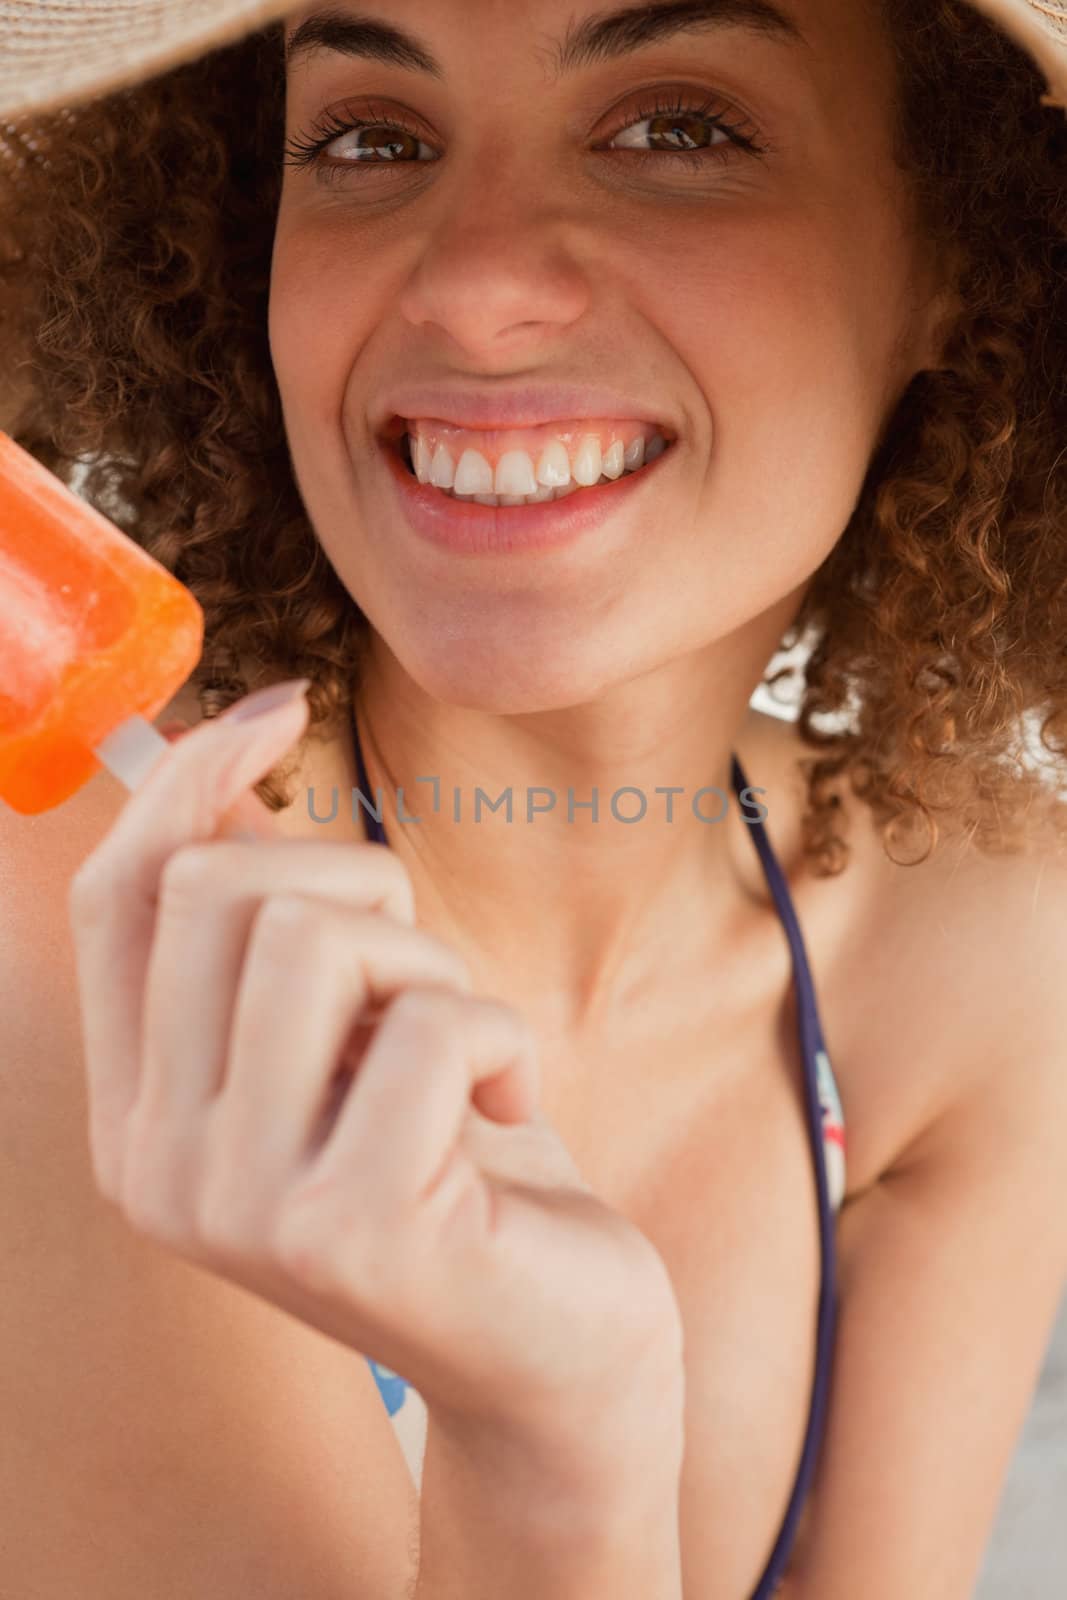 Young woman showing a great smile while holding a popsicle by Wavebreakmedia